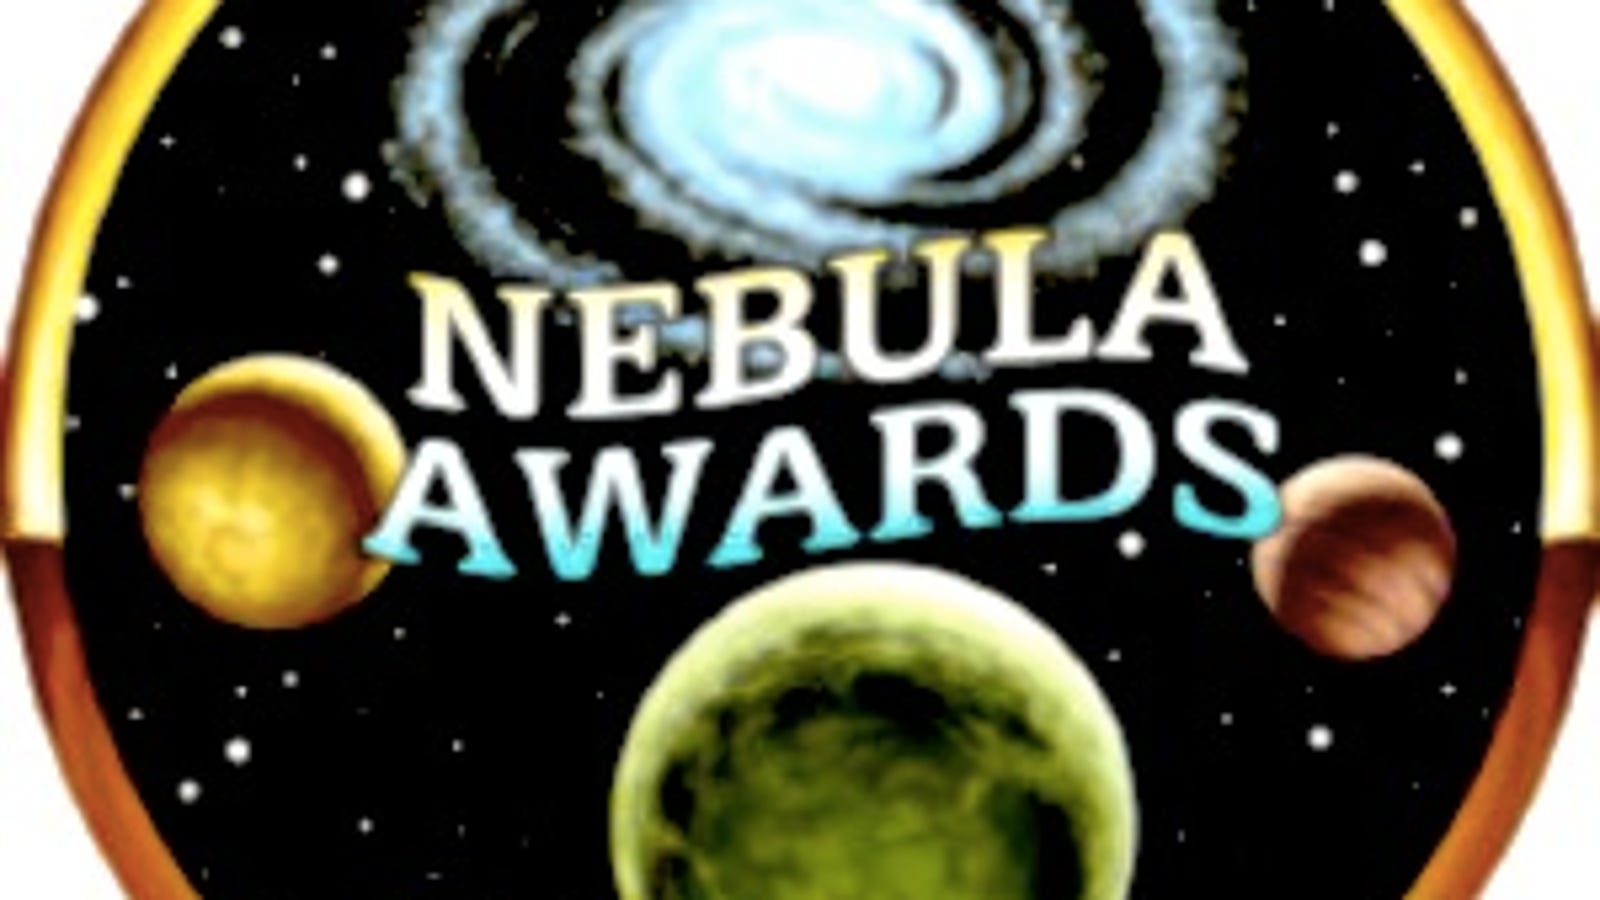 This year's Nebula Award nominees are here!